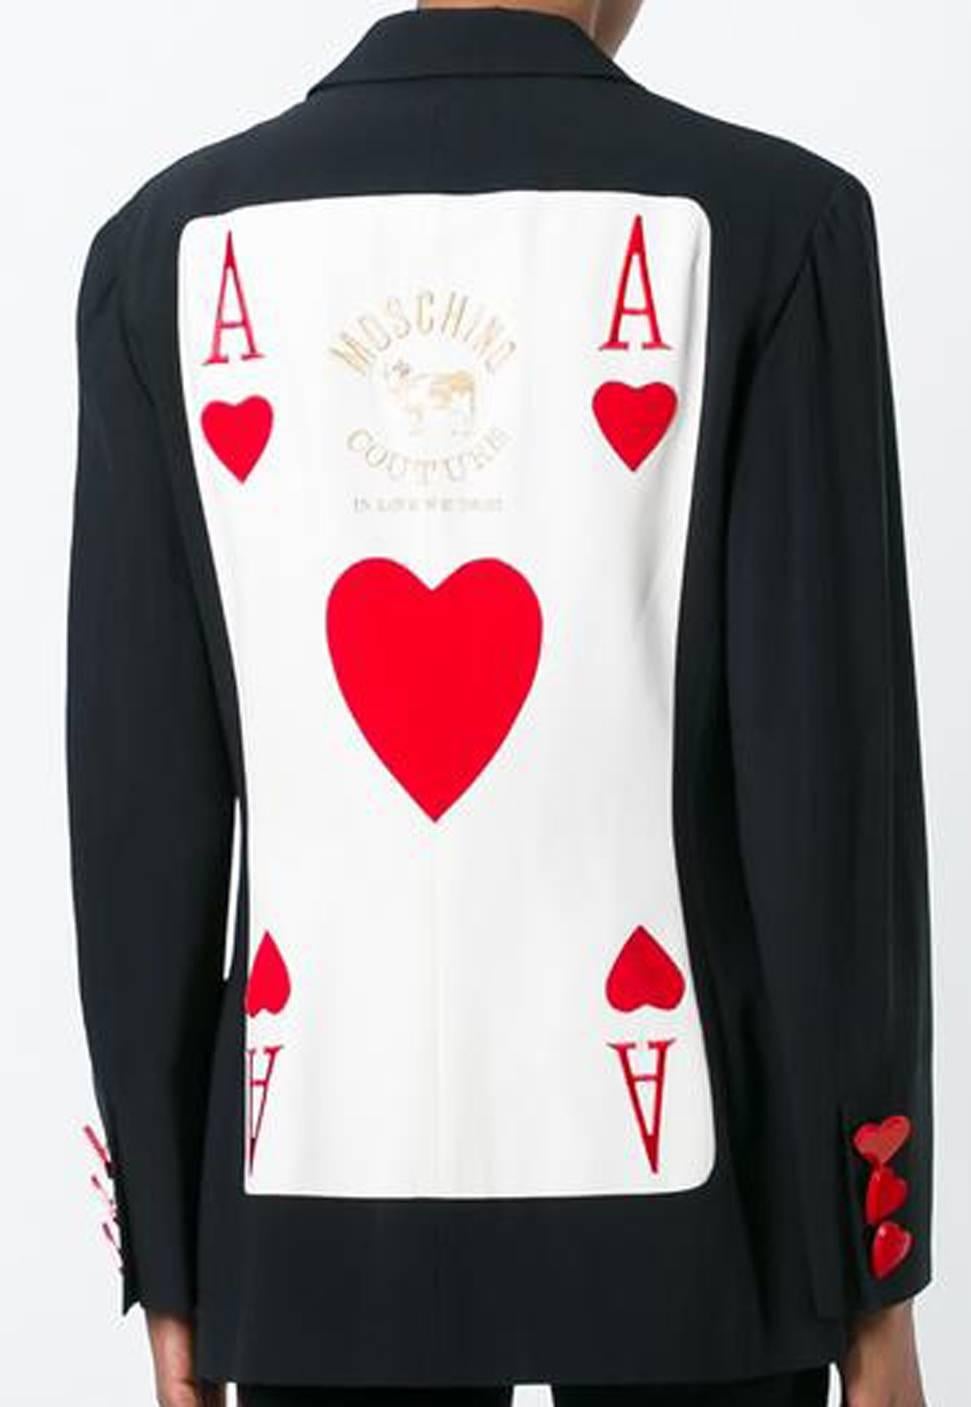 Moschino Couture black Ace of hearts blazer featuring notched lapels, long sleeves, red hearts buttons, a large Ace of hearts card detail at the back and a straight hem.
In excellent vintage condition. Made in Italy.
Estimated size: 42FR
We